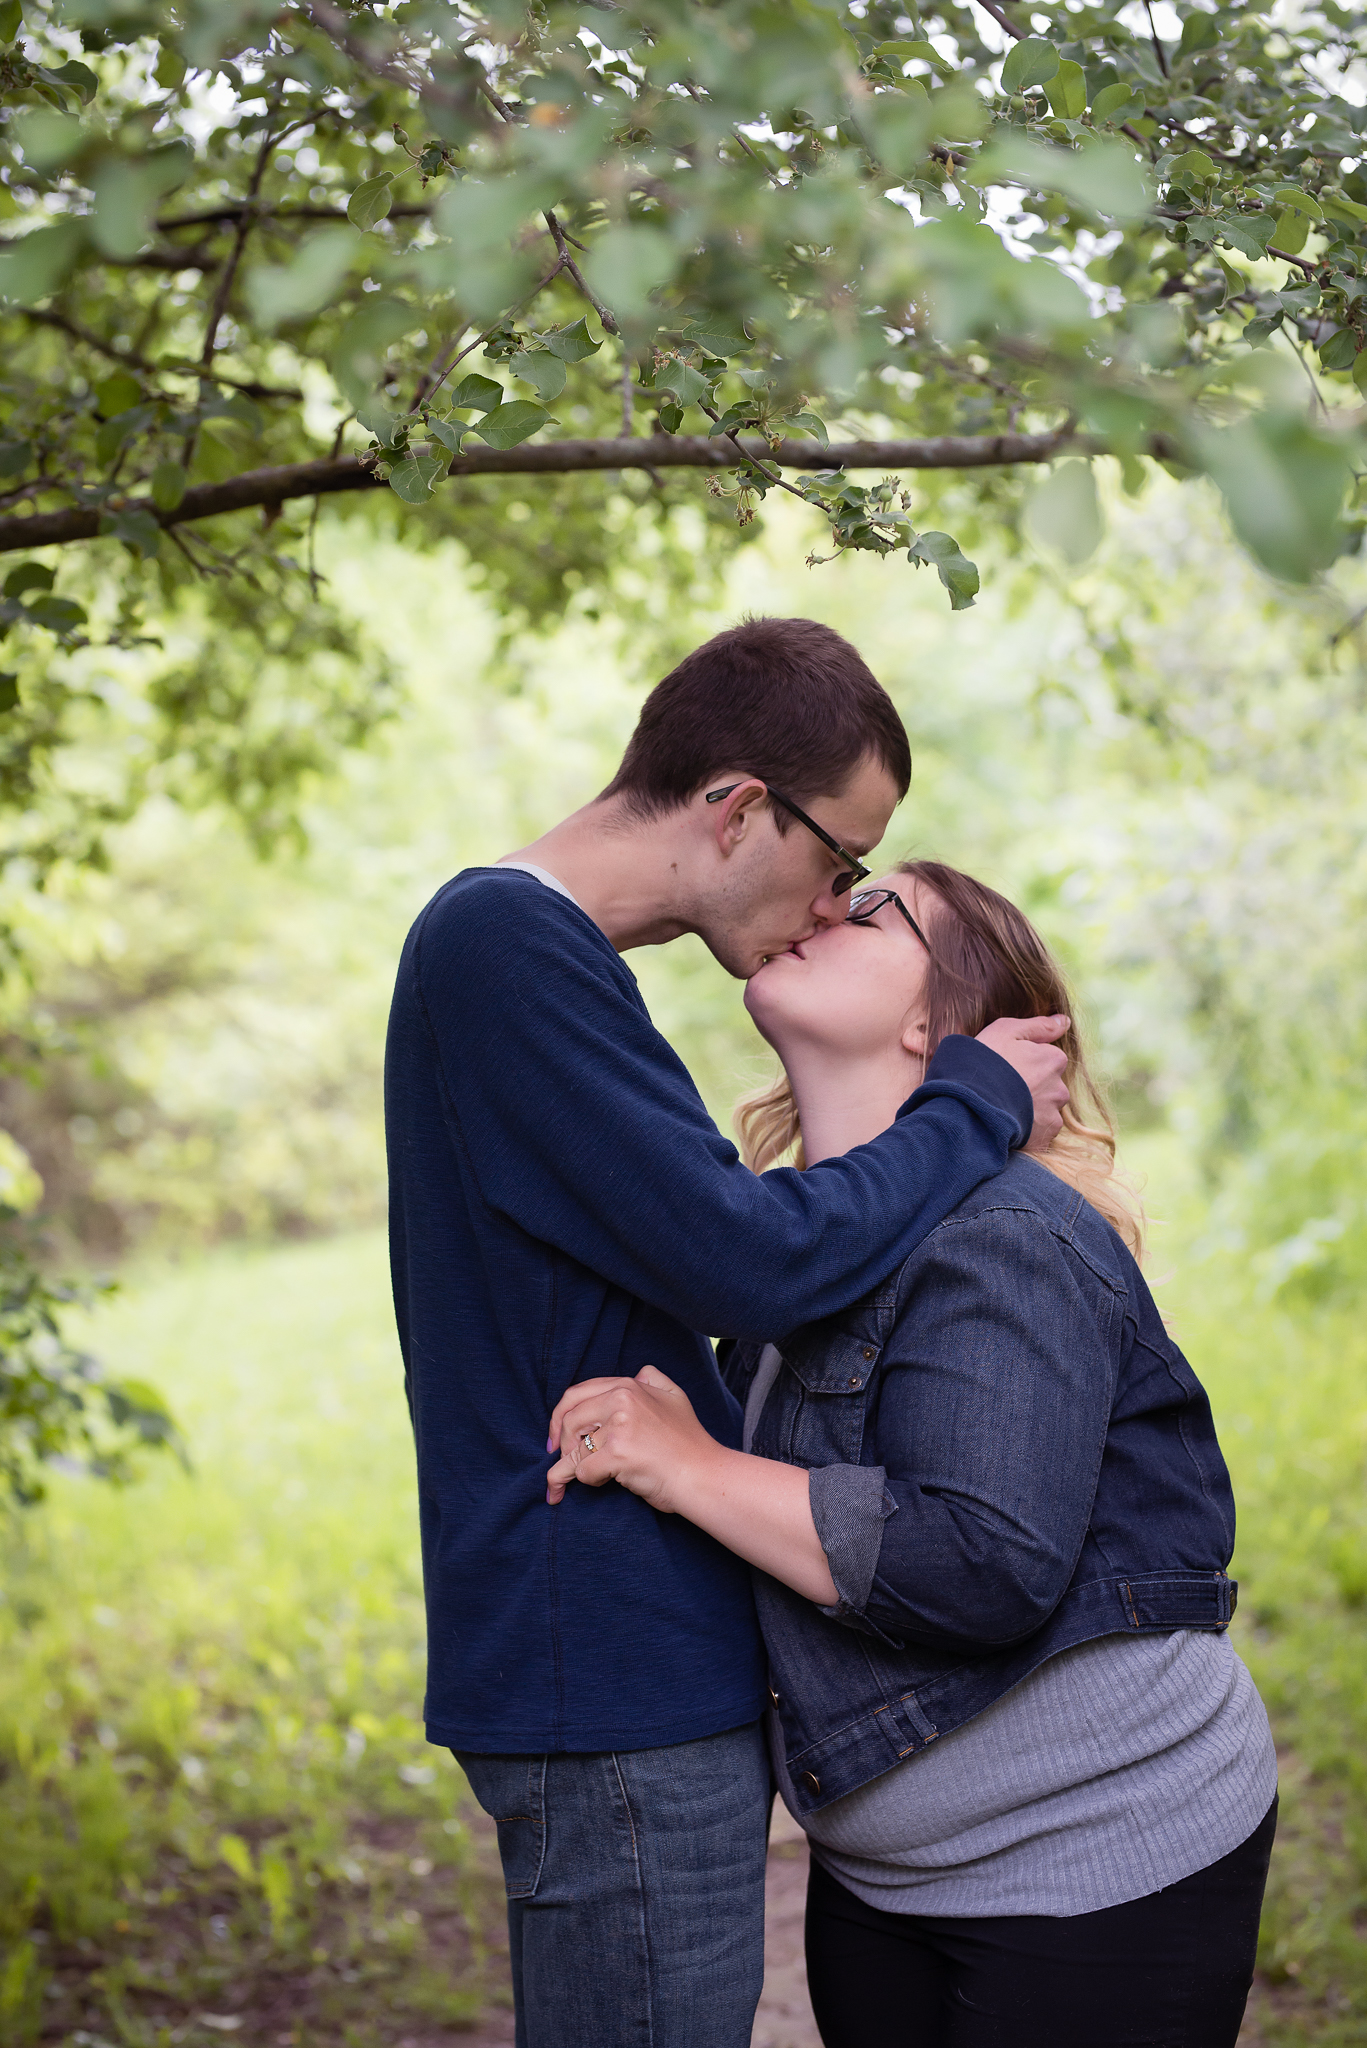 Couples255NaomiLuciennePhotography062018-2-Edit.jpg